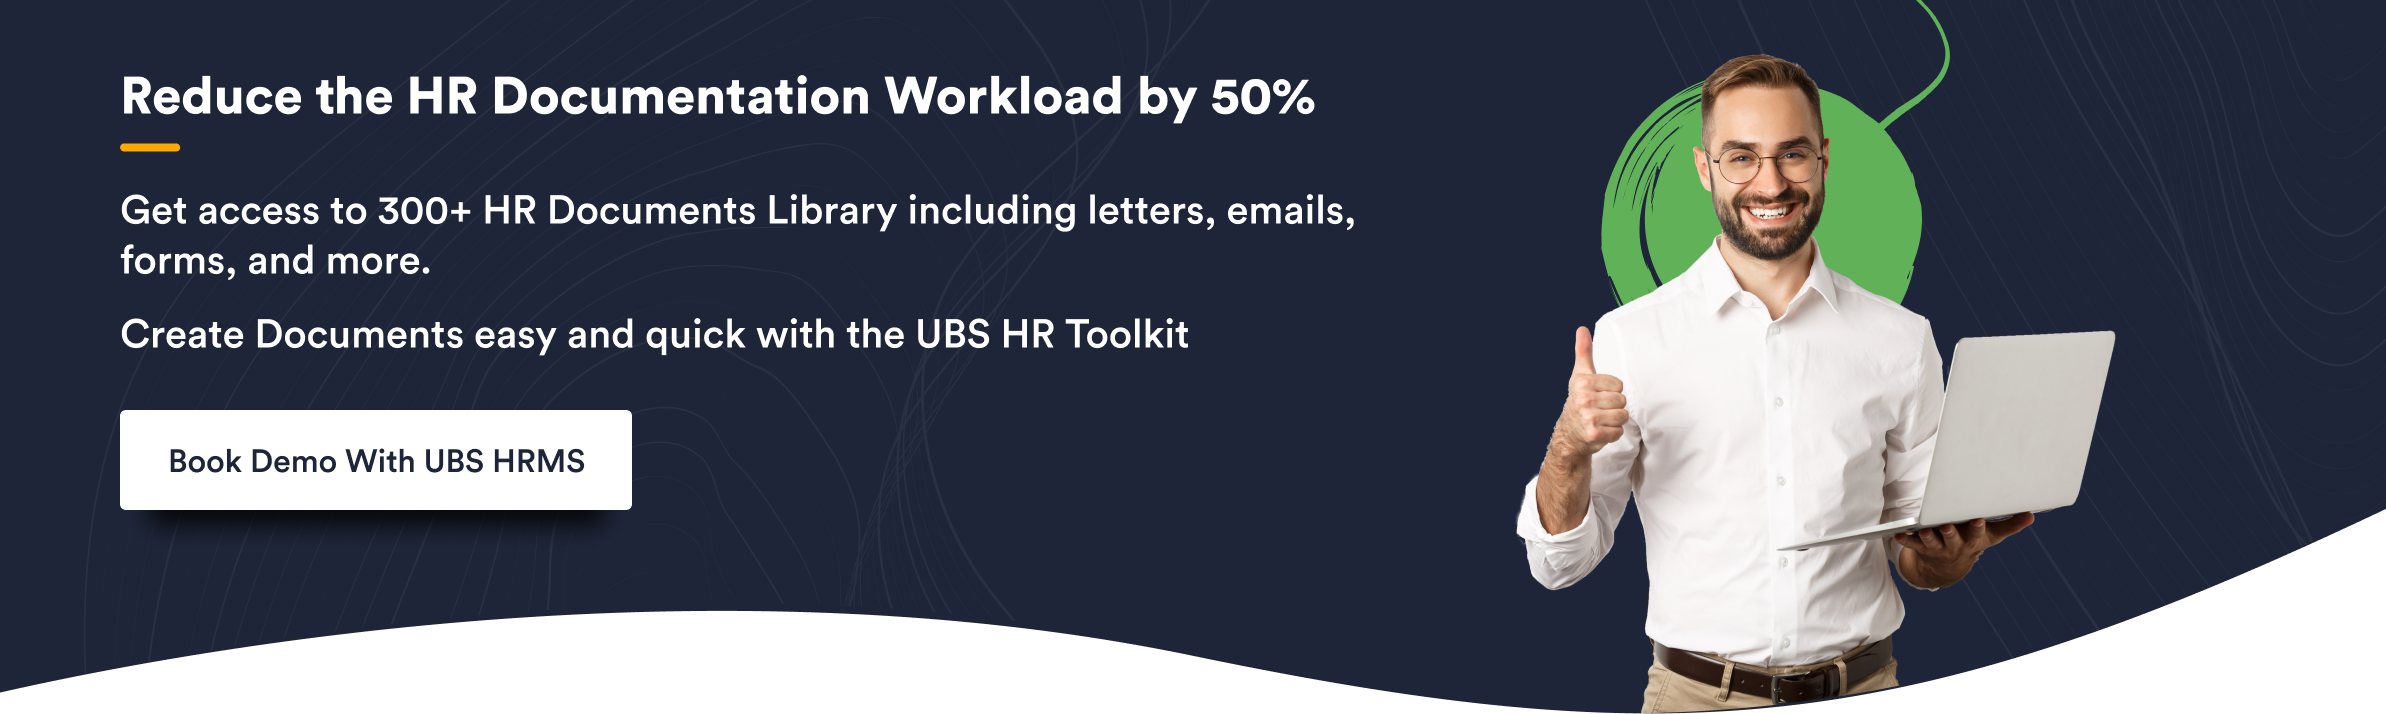 Reduce the HR Documentation Workload by 50